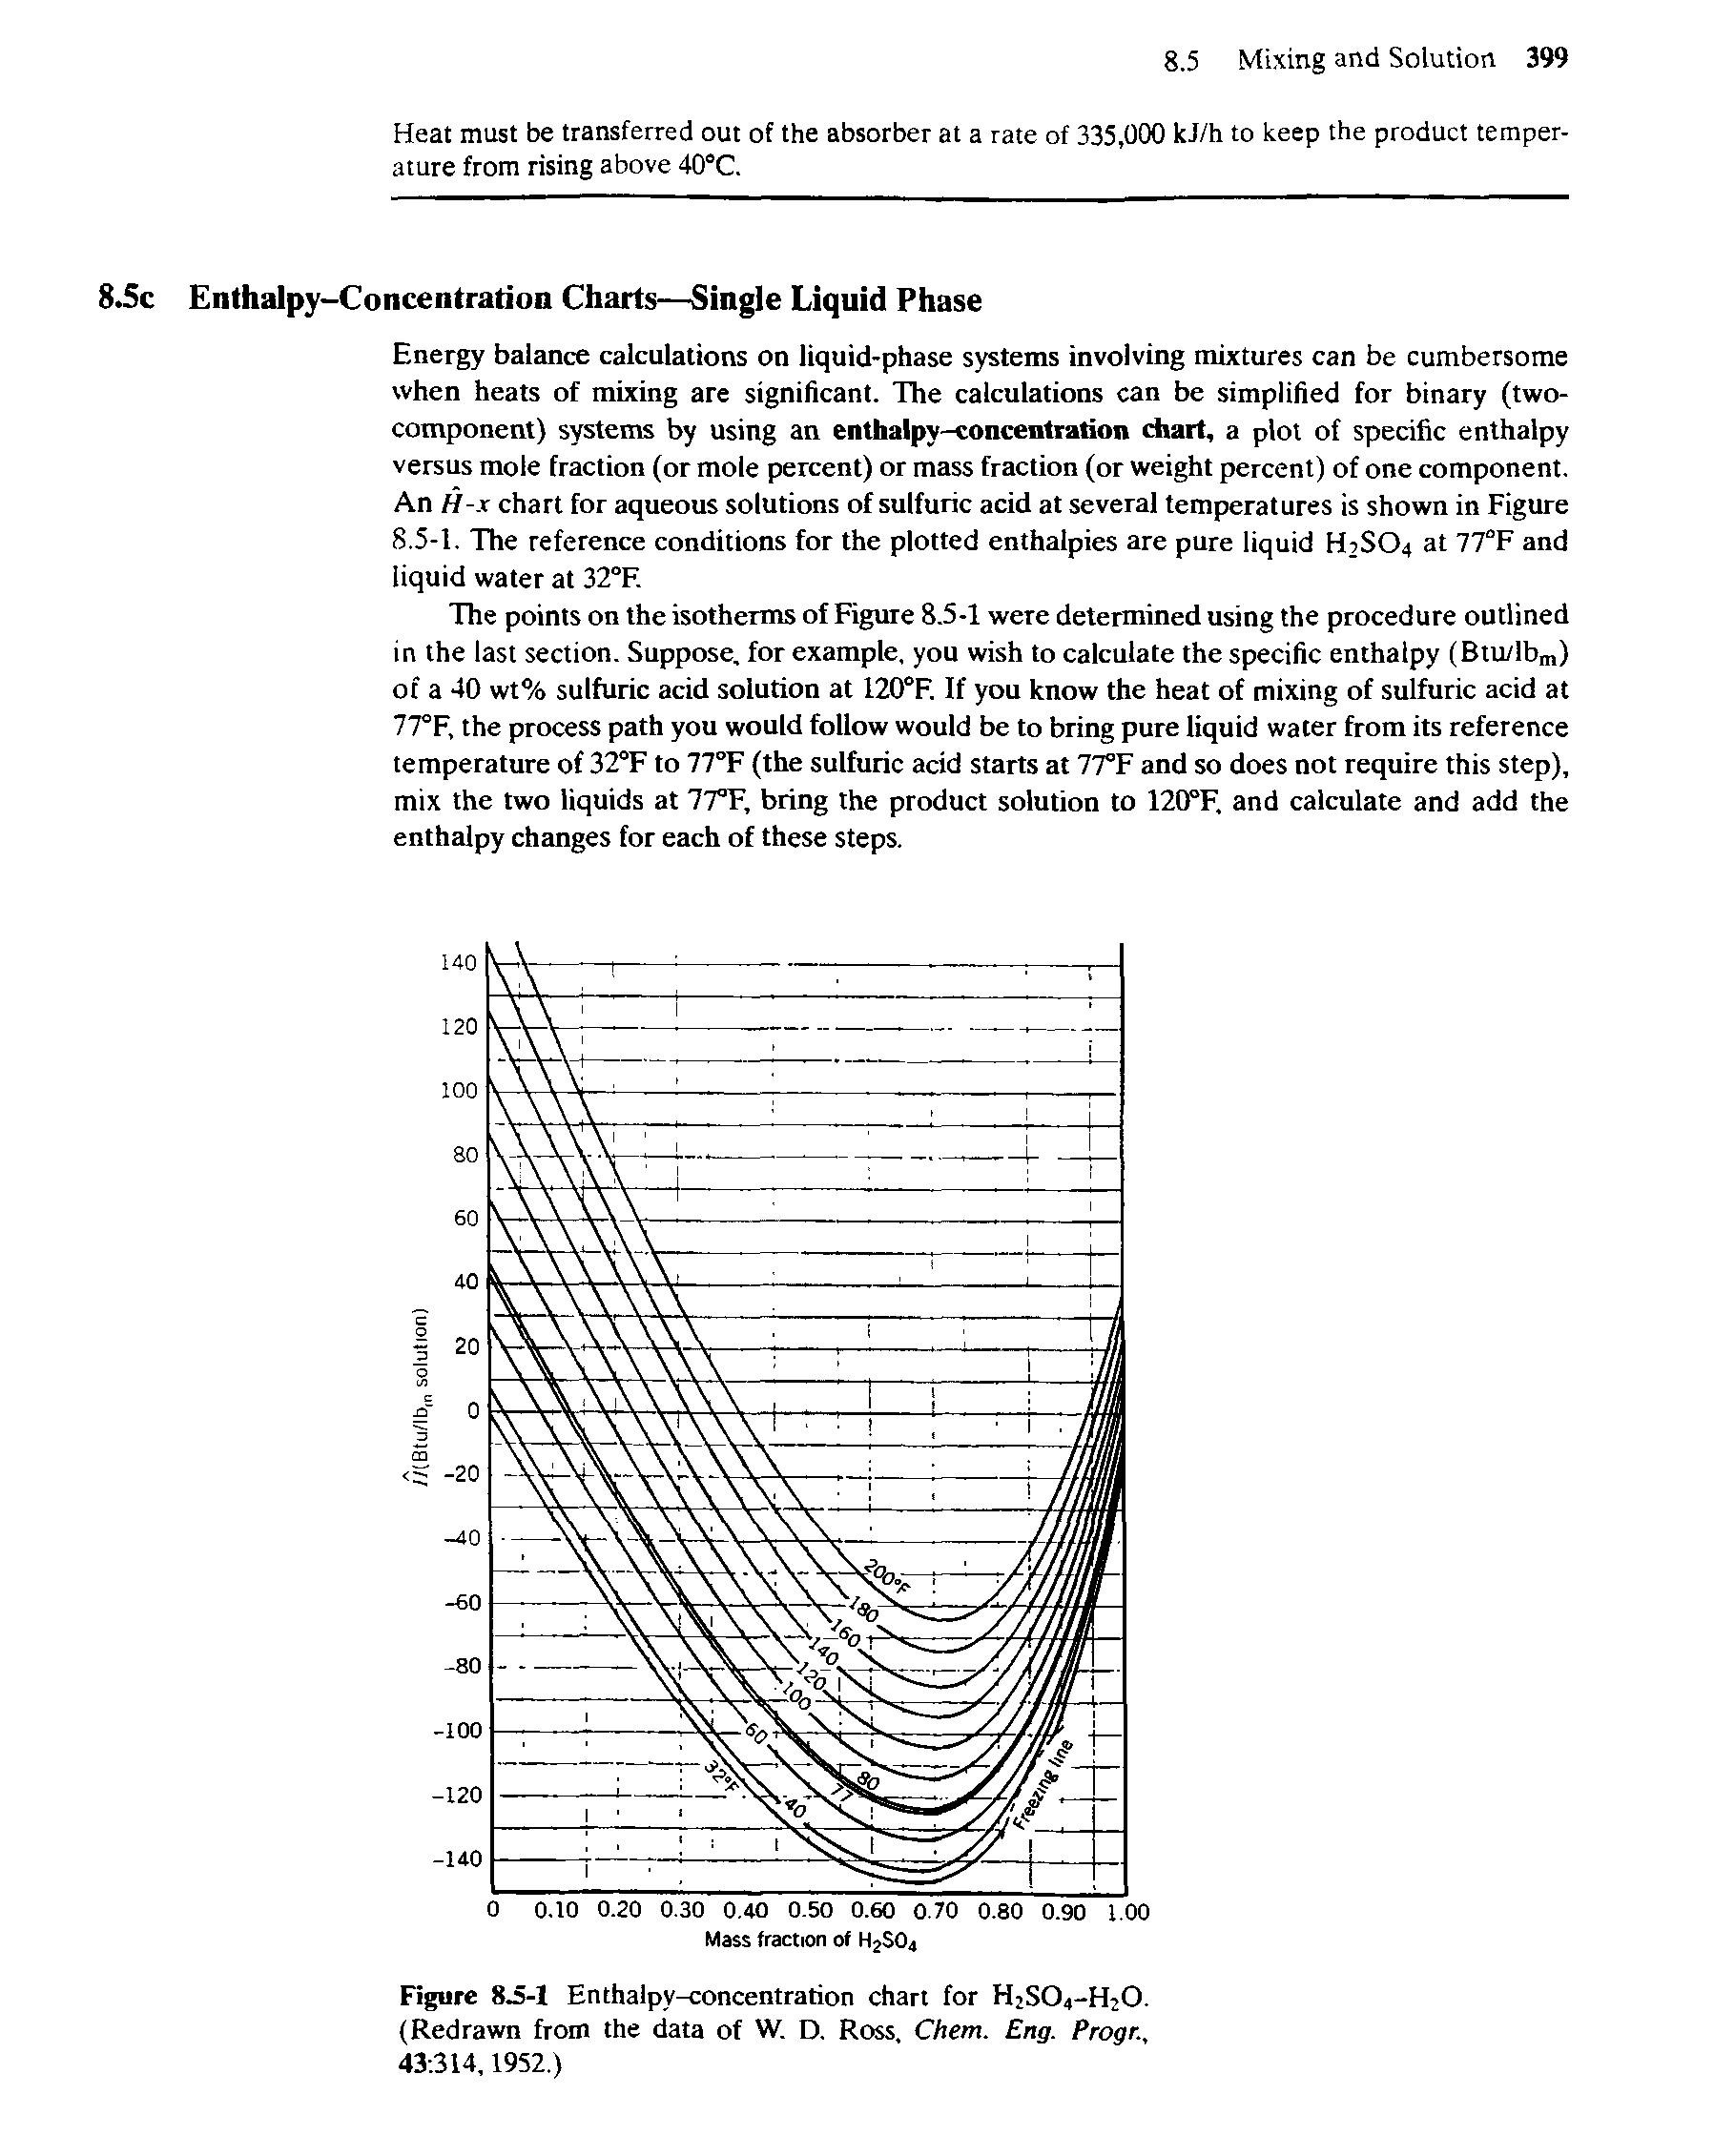 Figure 8.5-1 Enthalpy-concentration chart for H2SO4-H2O. (Redrawn from the data of W, D. Ross, Chem. Eng. Progr., 43 314,1952.)...